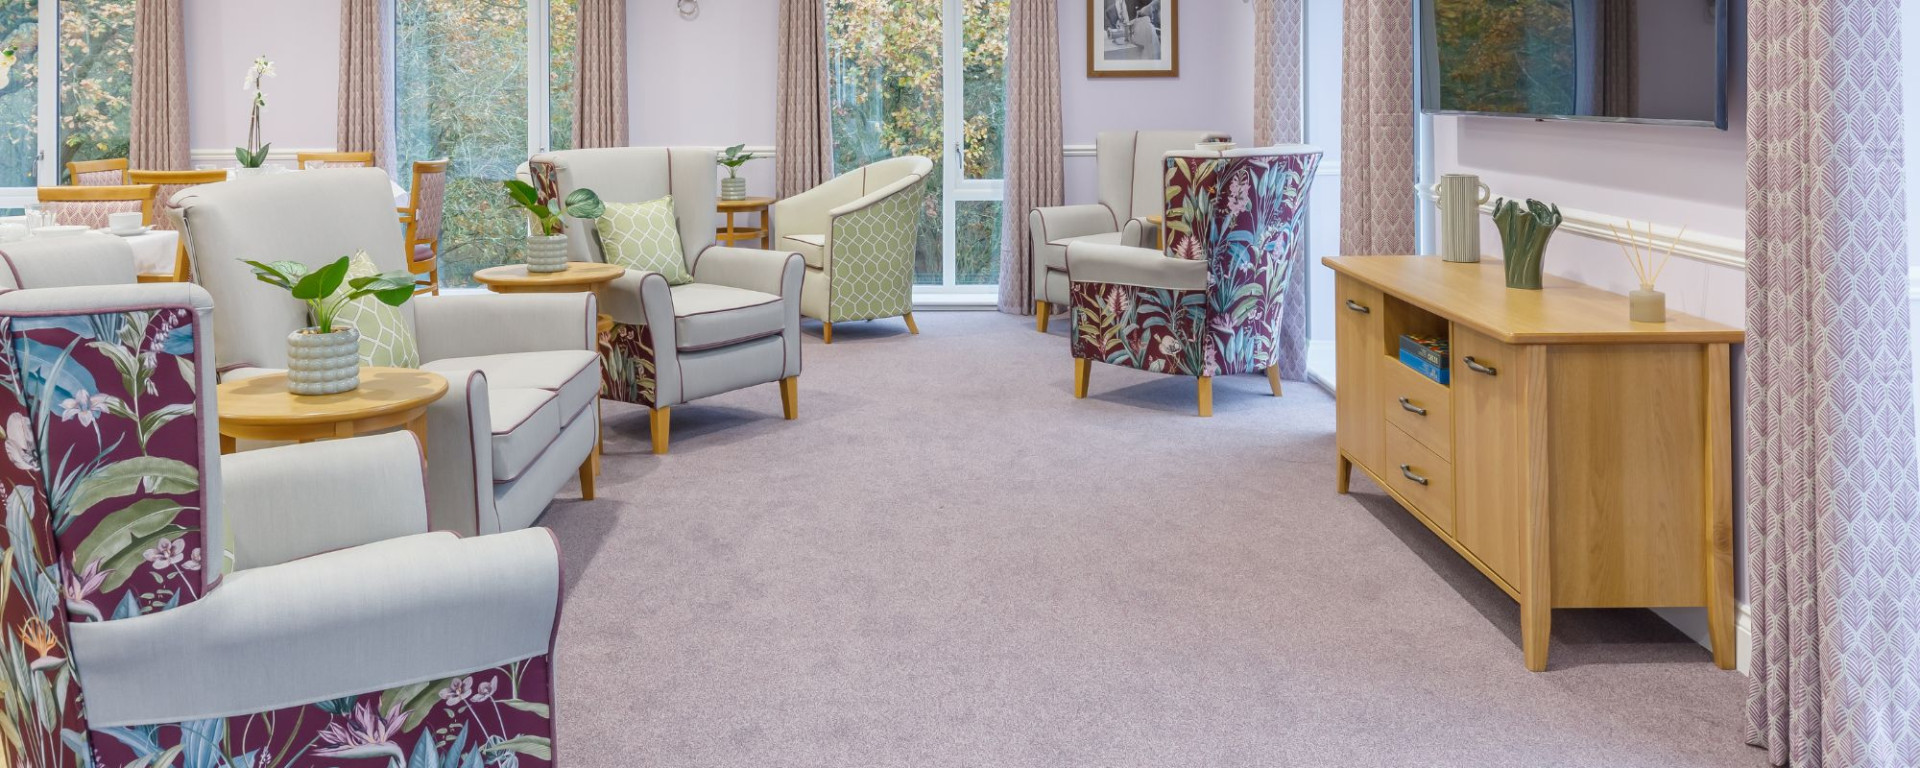 Bespoke Care Home Furniture and Interiors